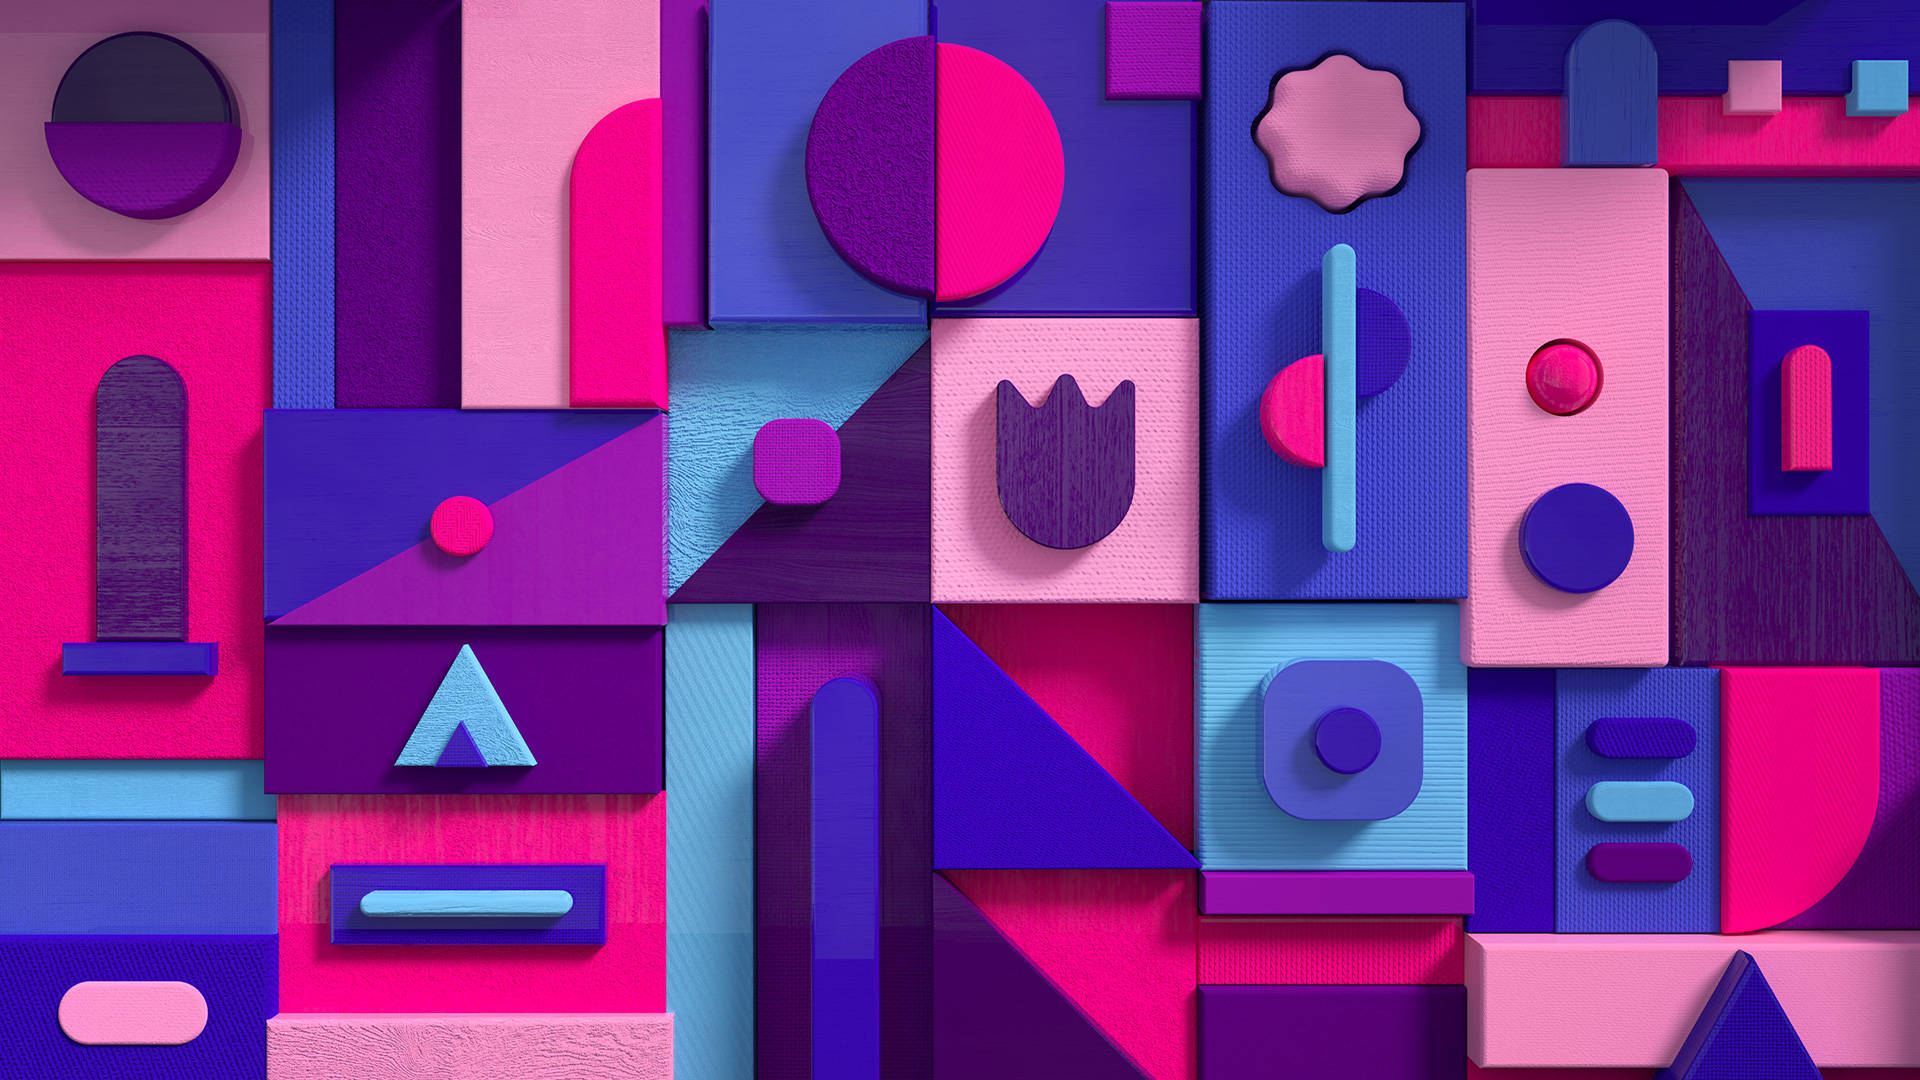 Microsoft Teams Pastel And Shapes Background